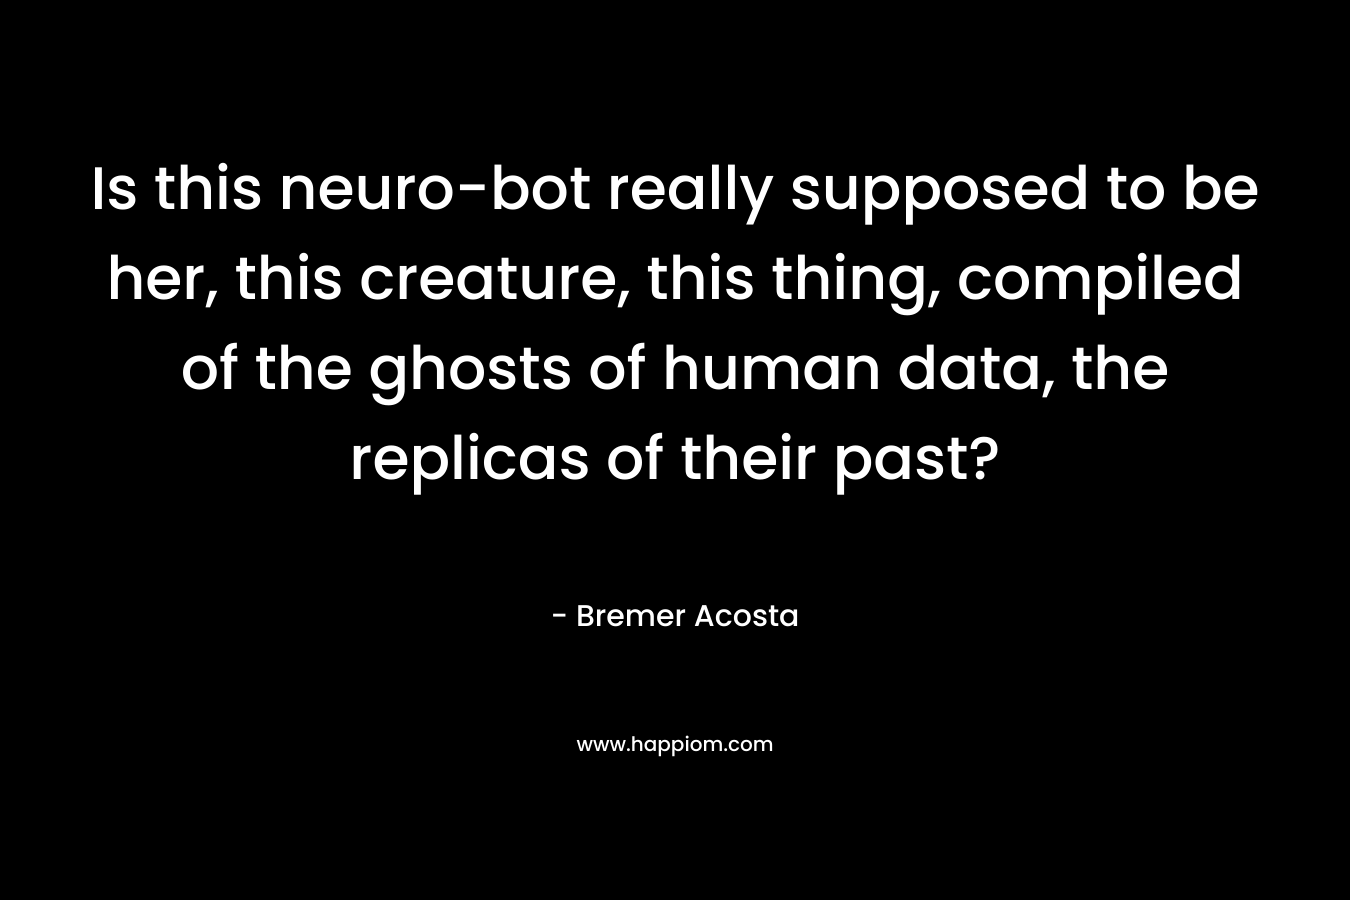 Is this neuro-bot really supposed to be her, this creature, this thing, compiled of the ghosts of human data, the replicas of their past? – Bremer Acosta